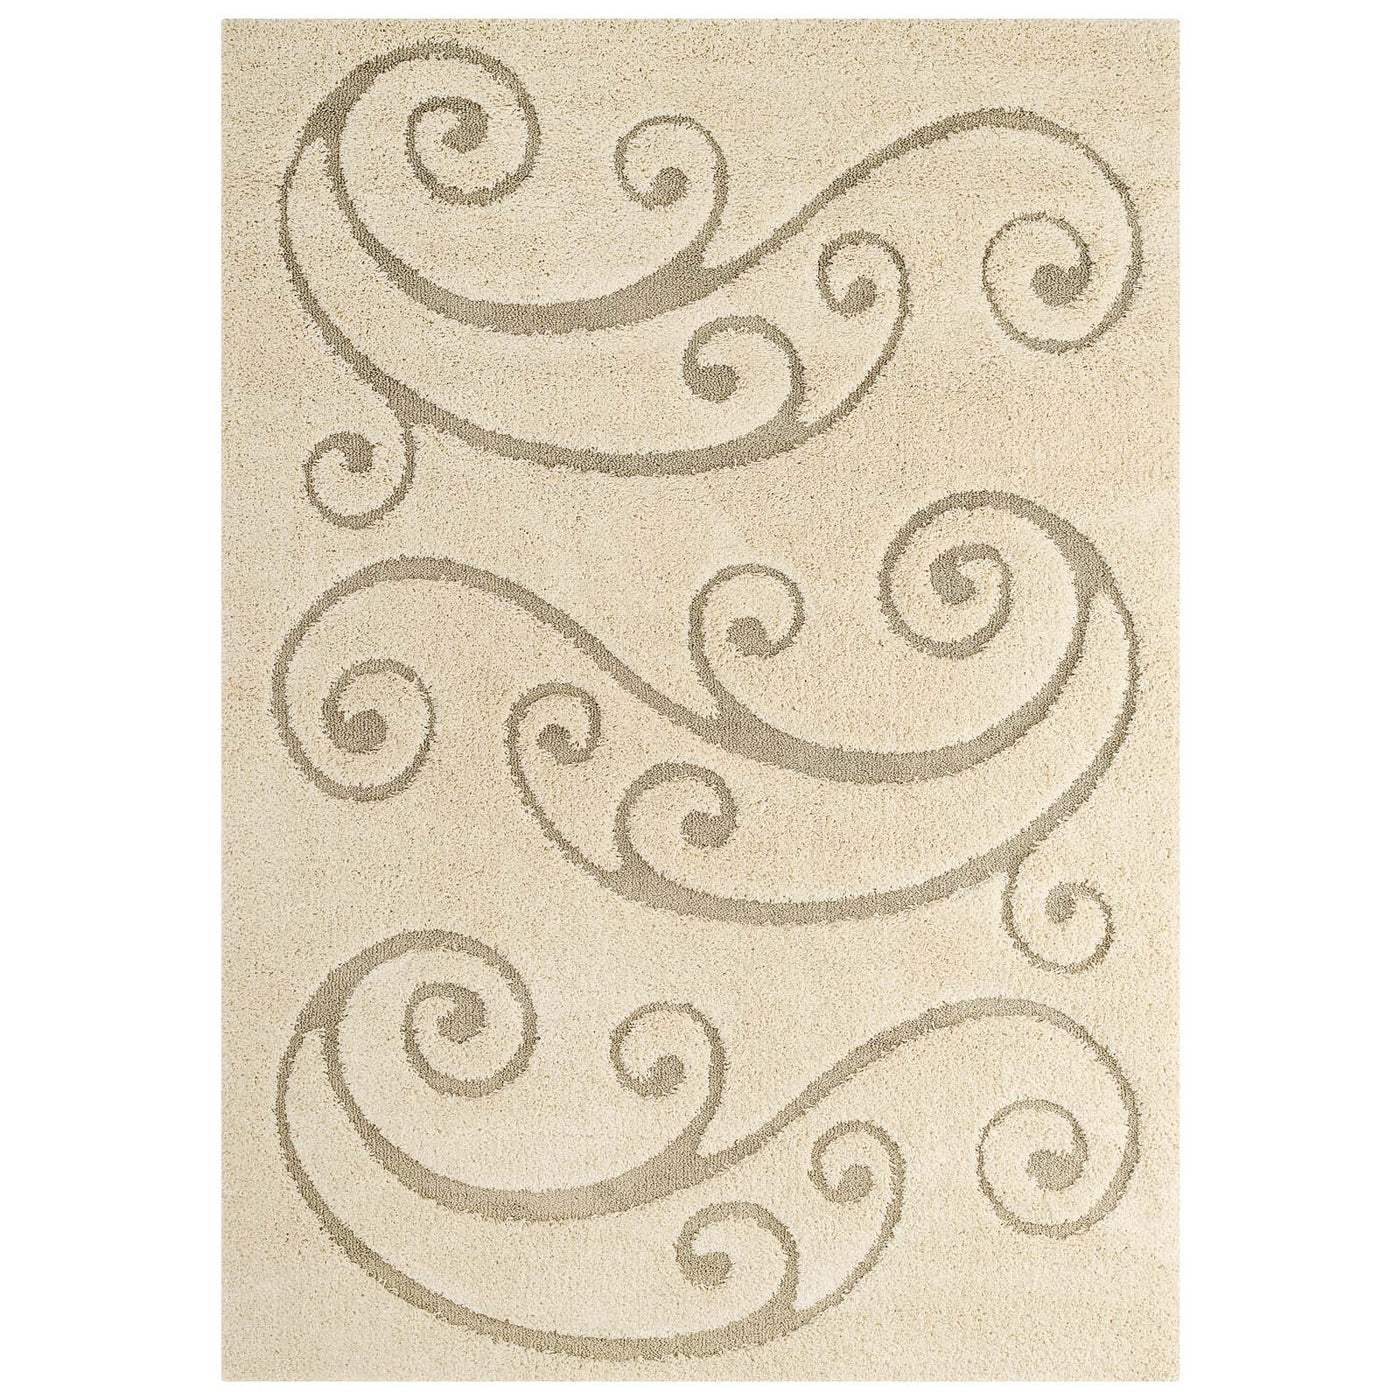 Jubilant Sprout Scrolling Vine 8x10 Shag Area Rug